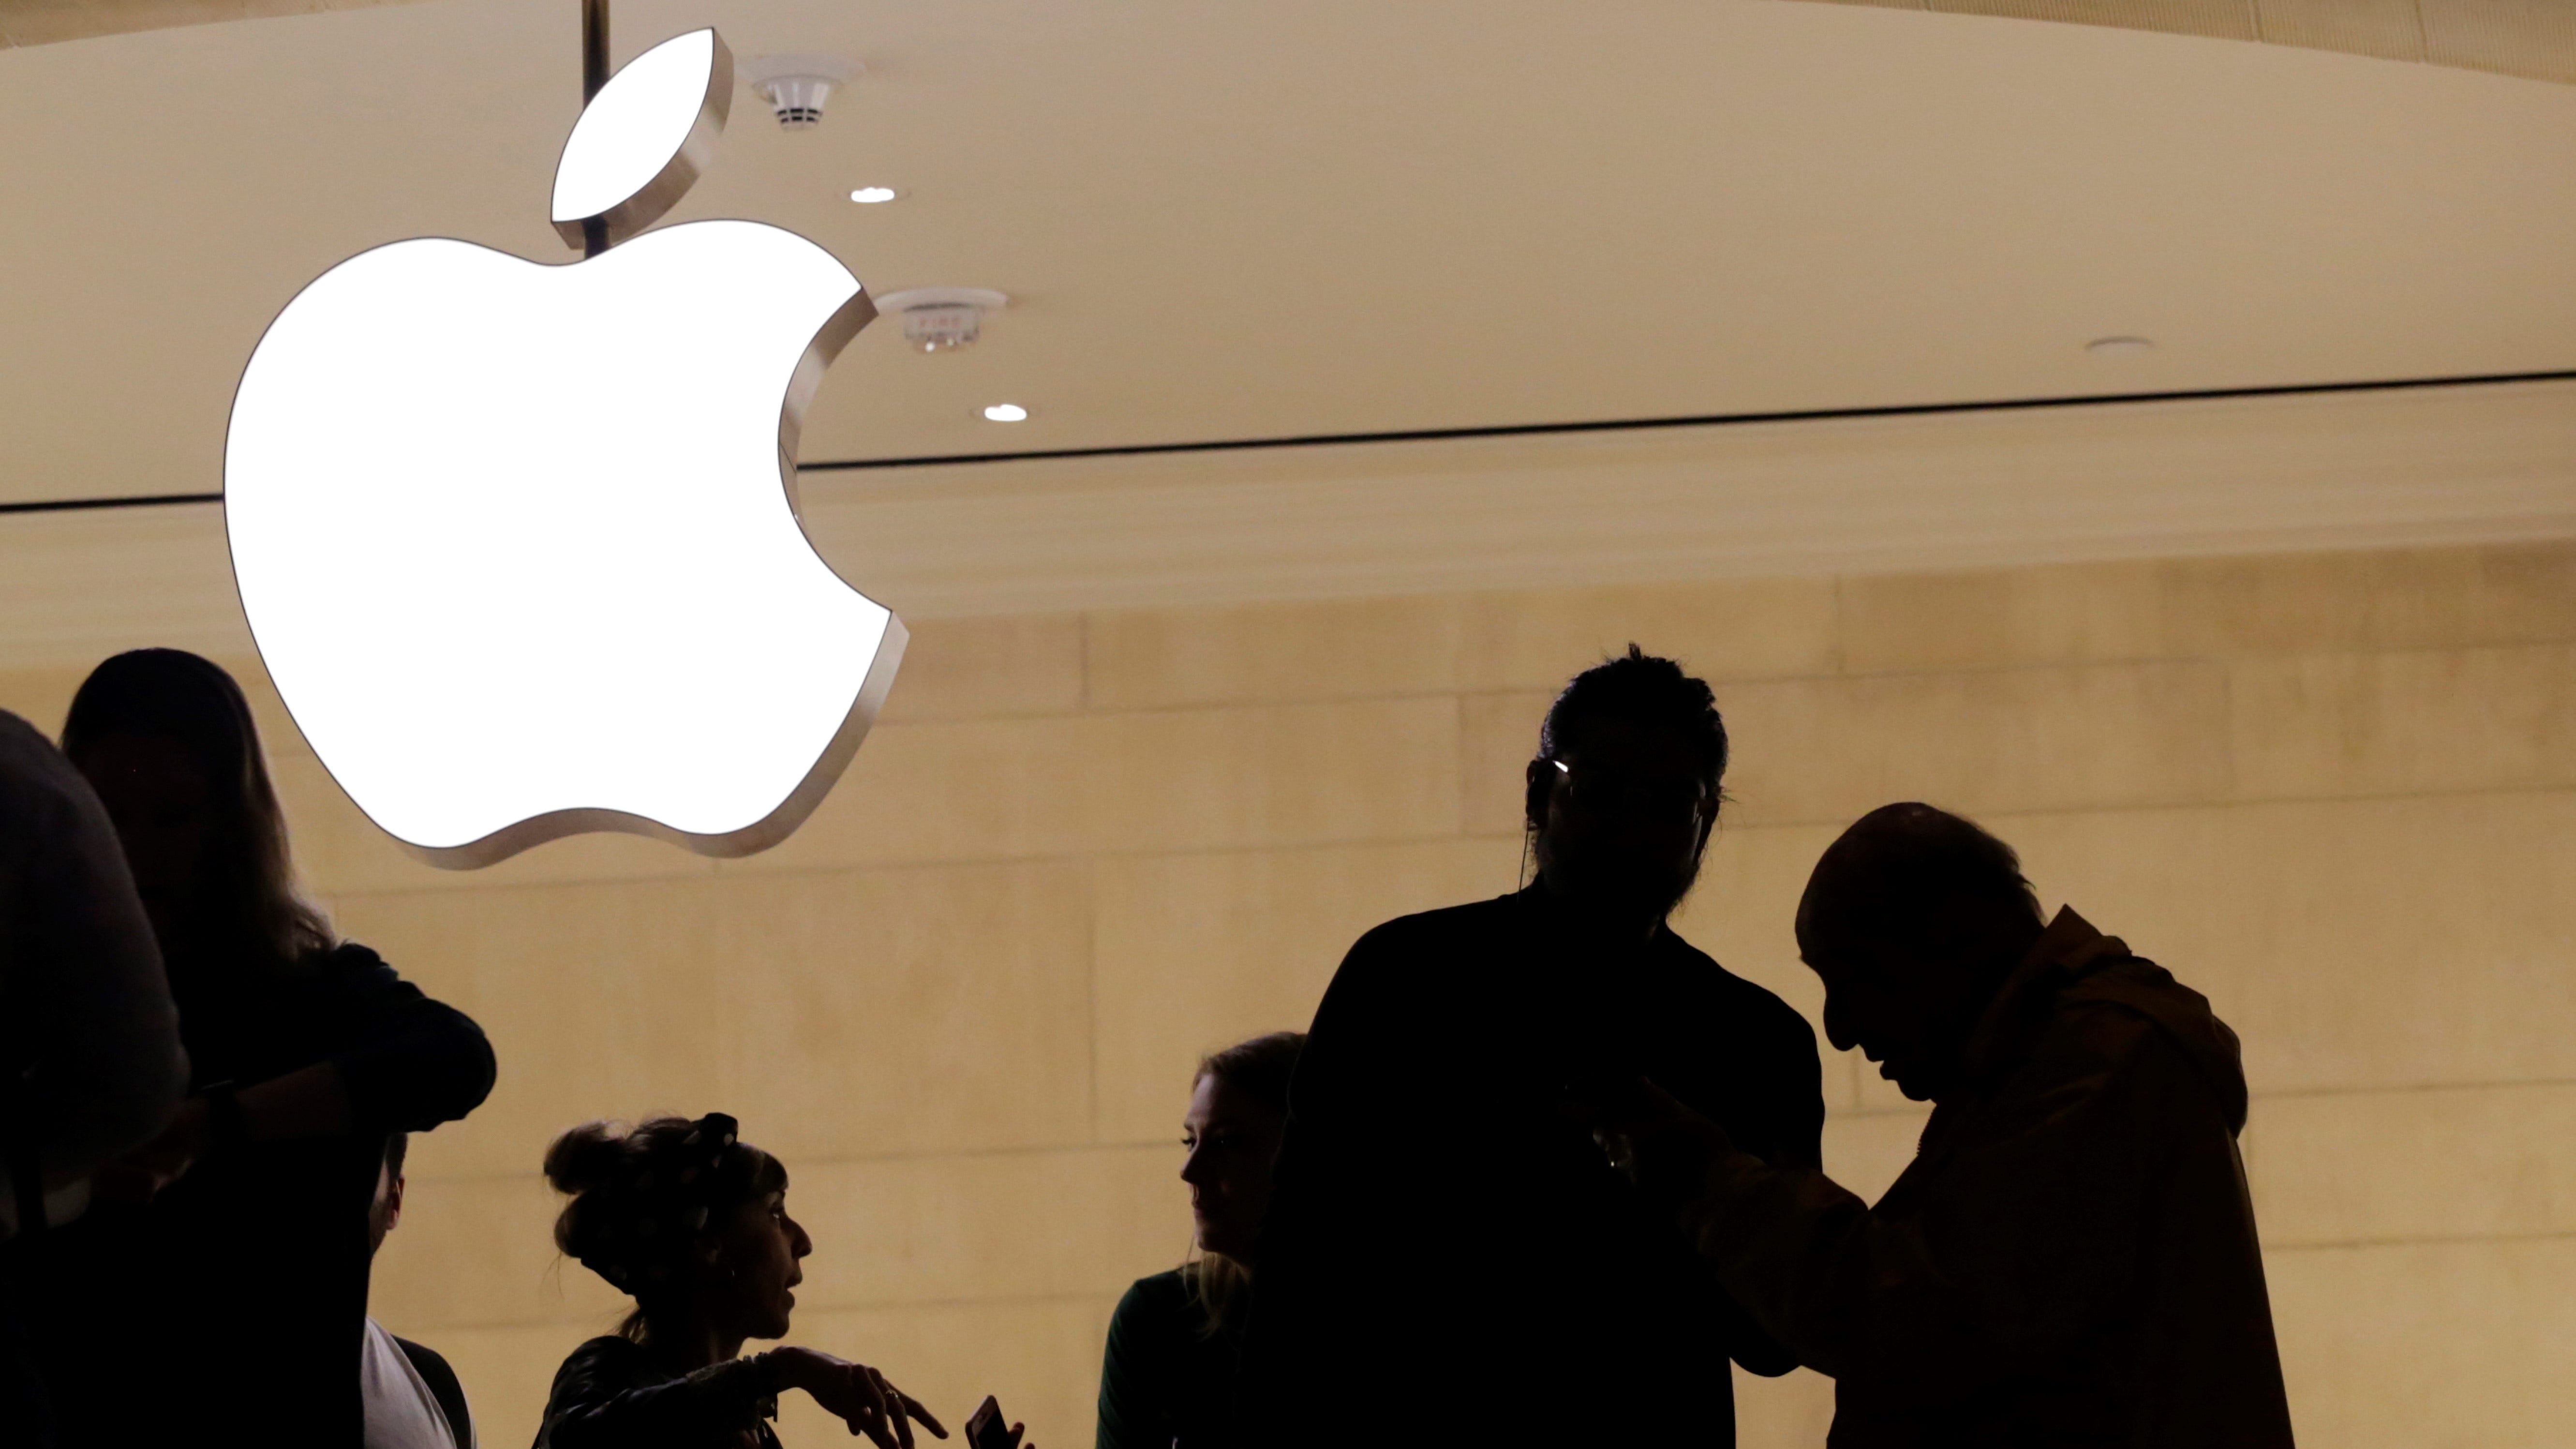 Apple's App Store pricing policies draw Supreme Court scrutiny